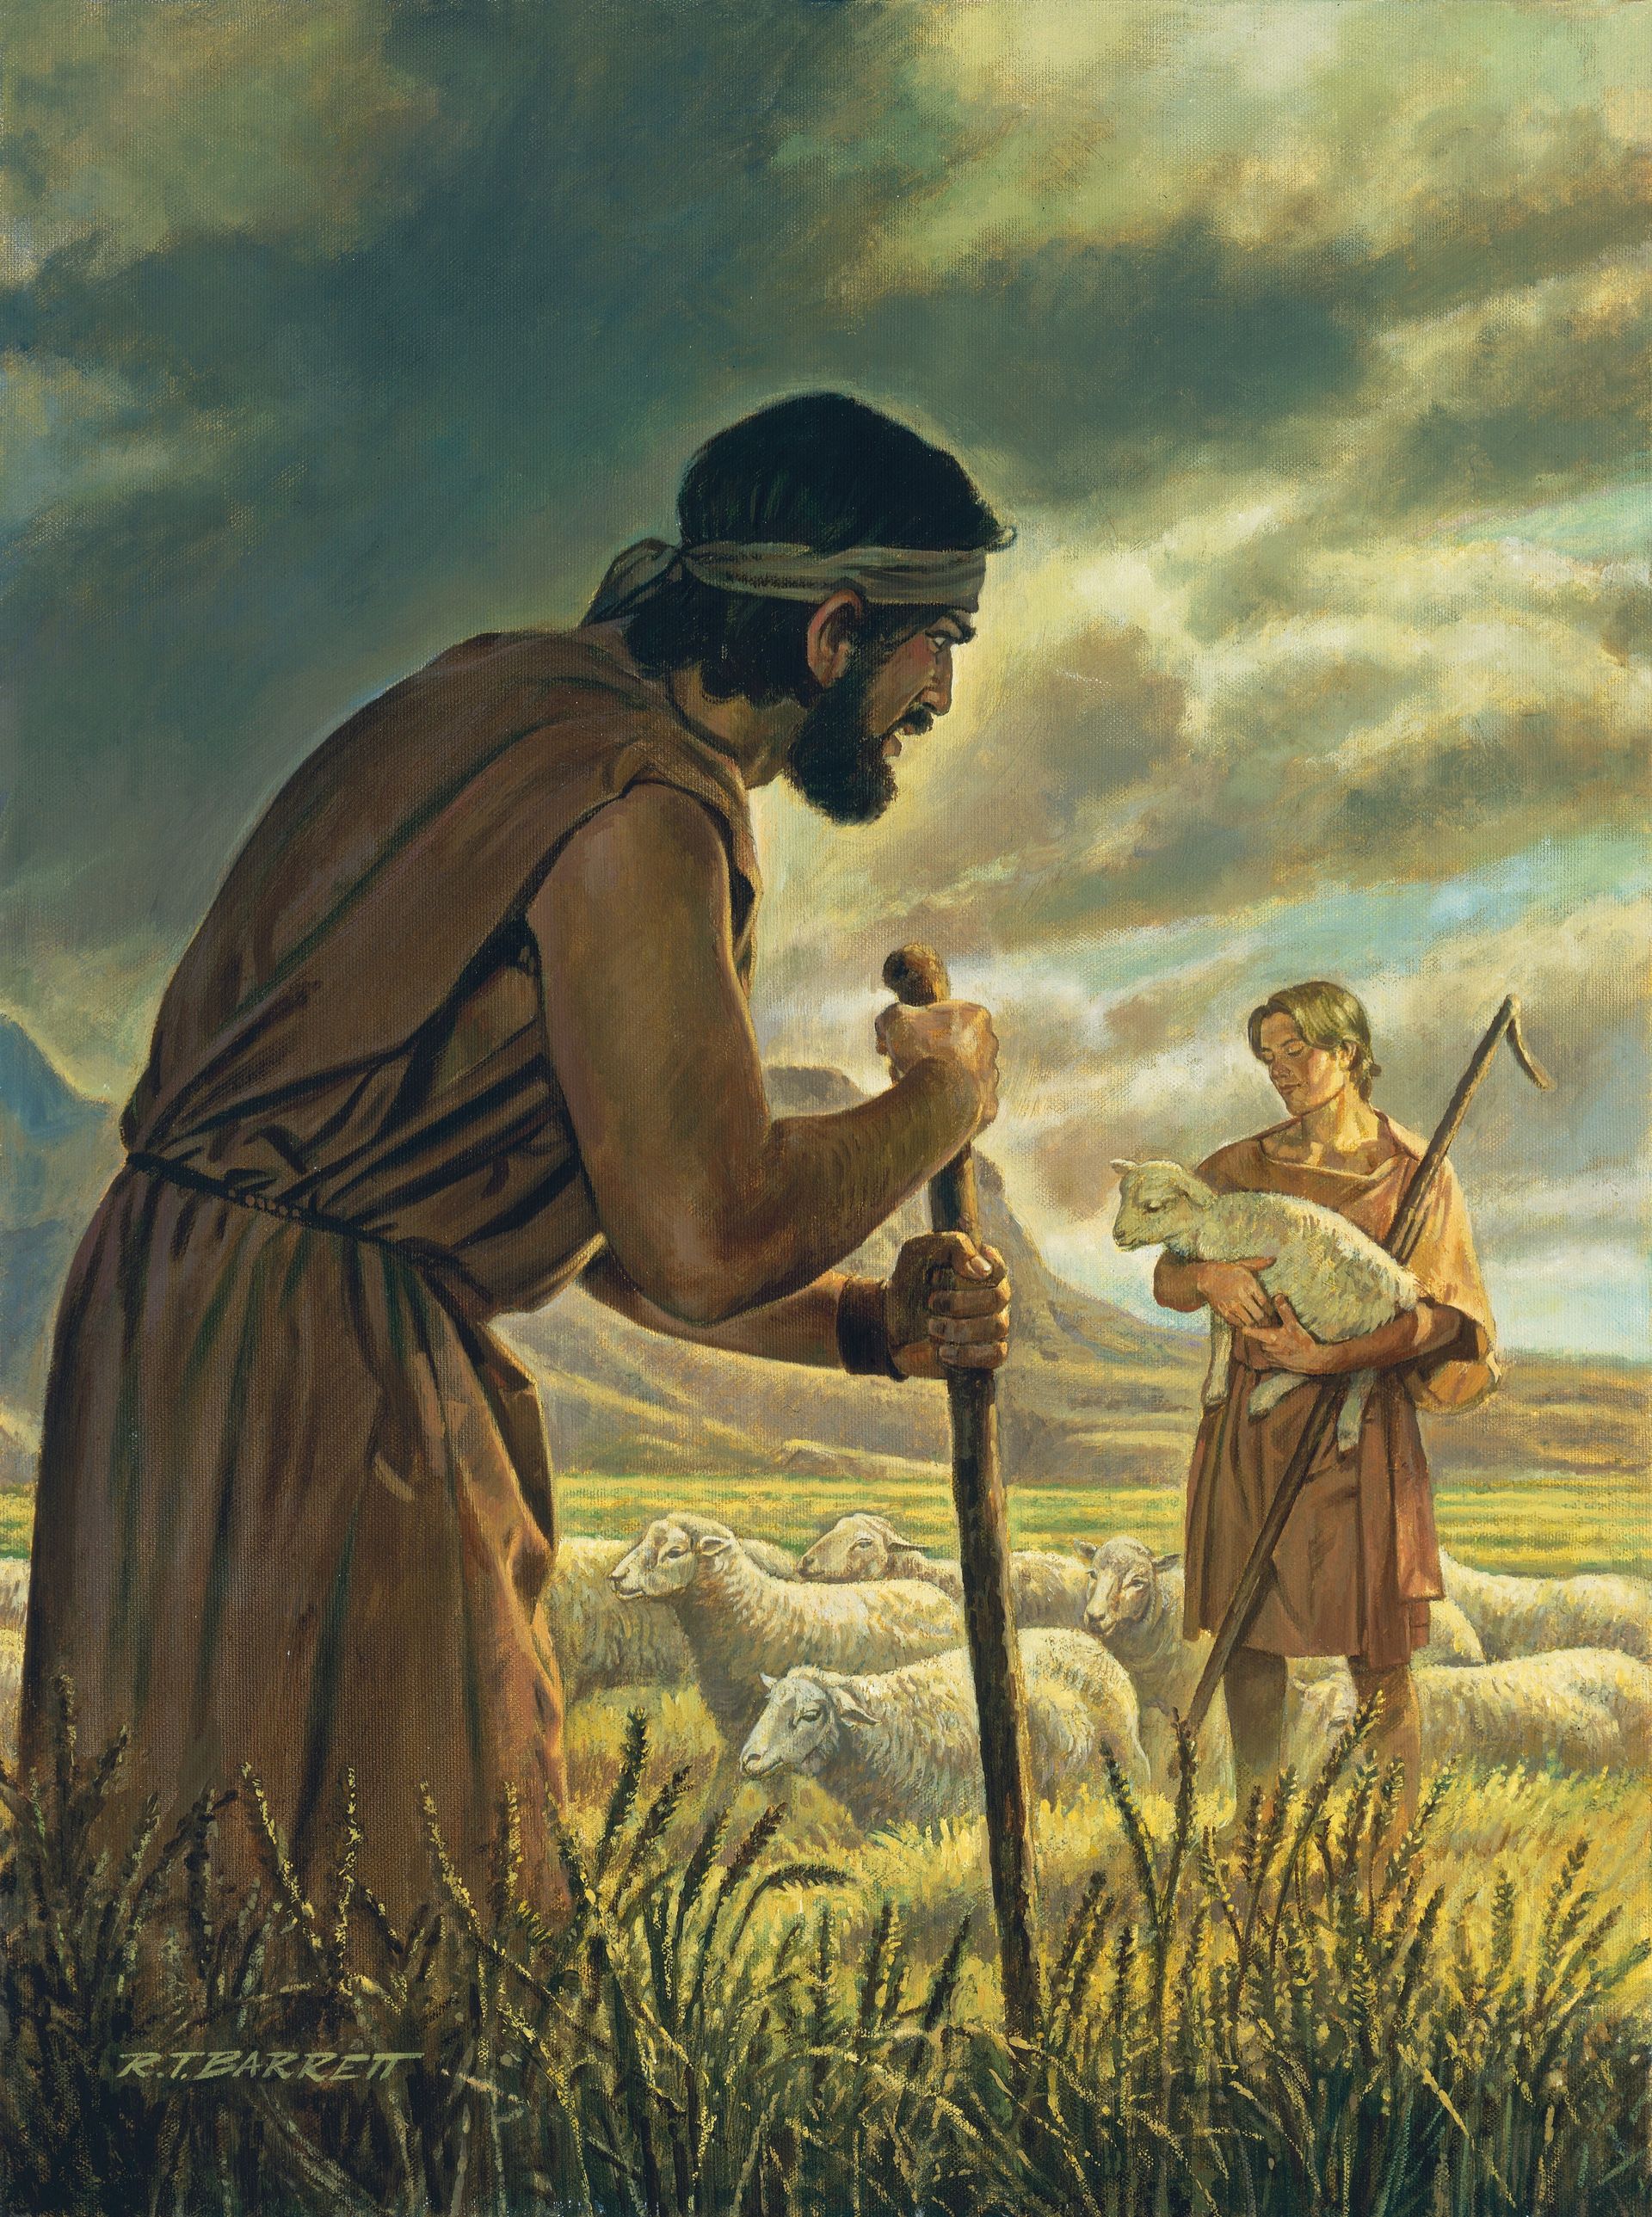 Cain and Abel, by Robert T. Barrett